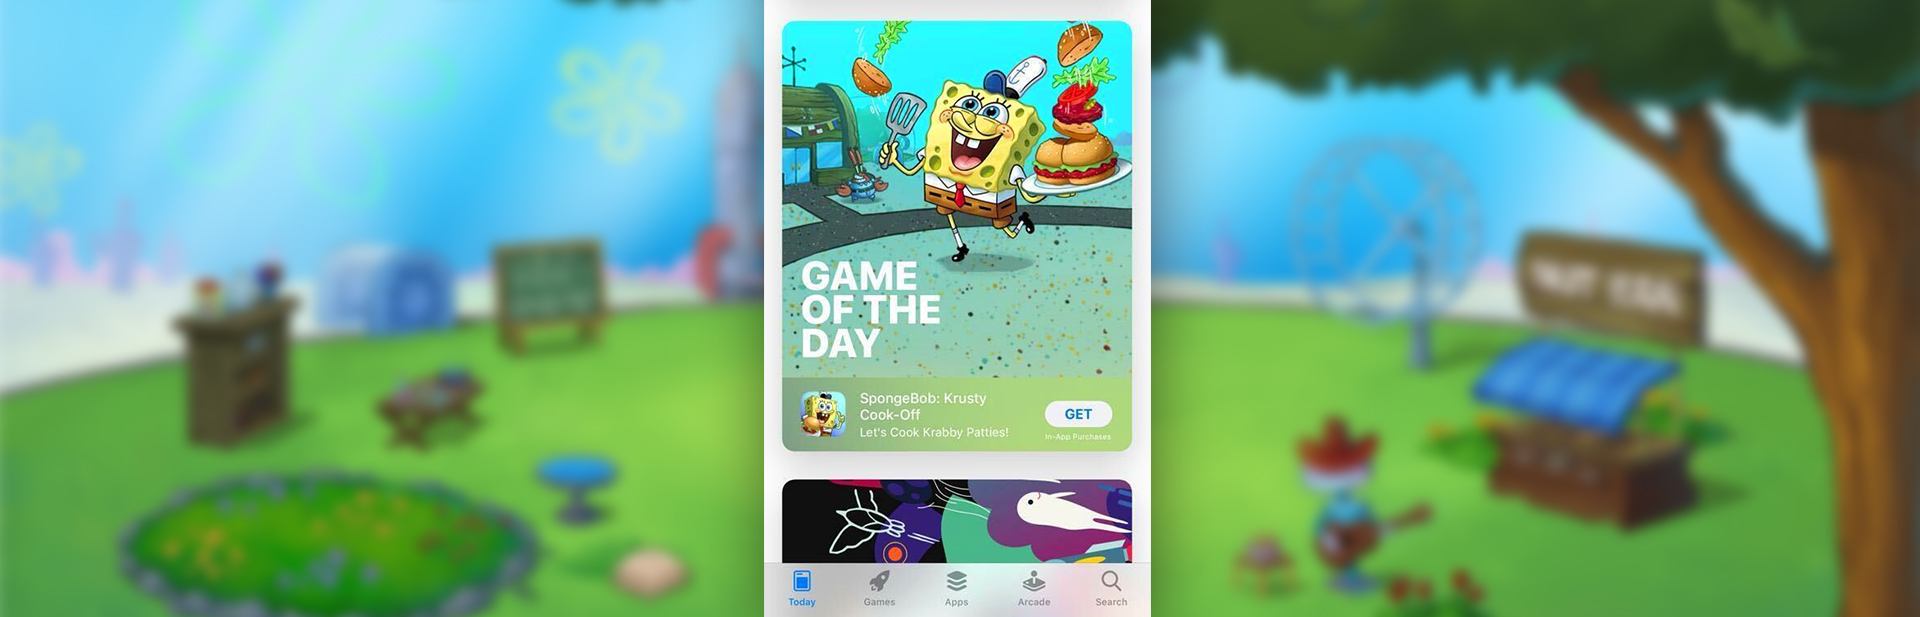 Game of the Day Feature on App Store